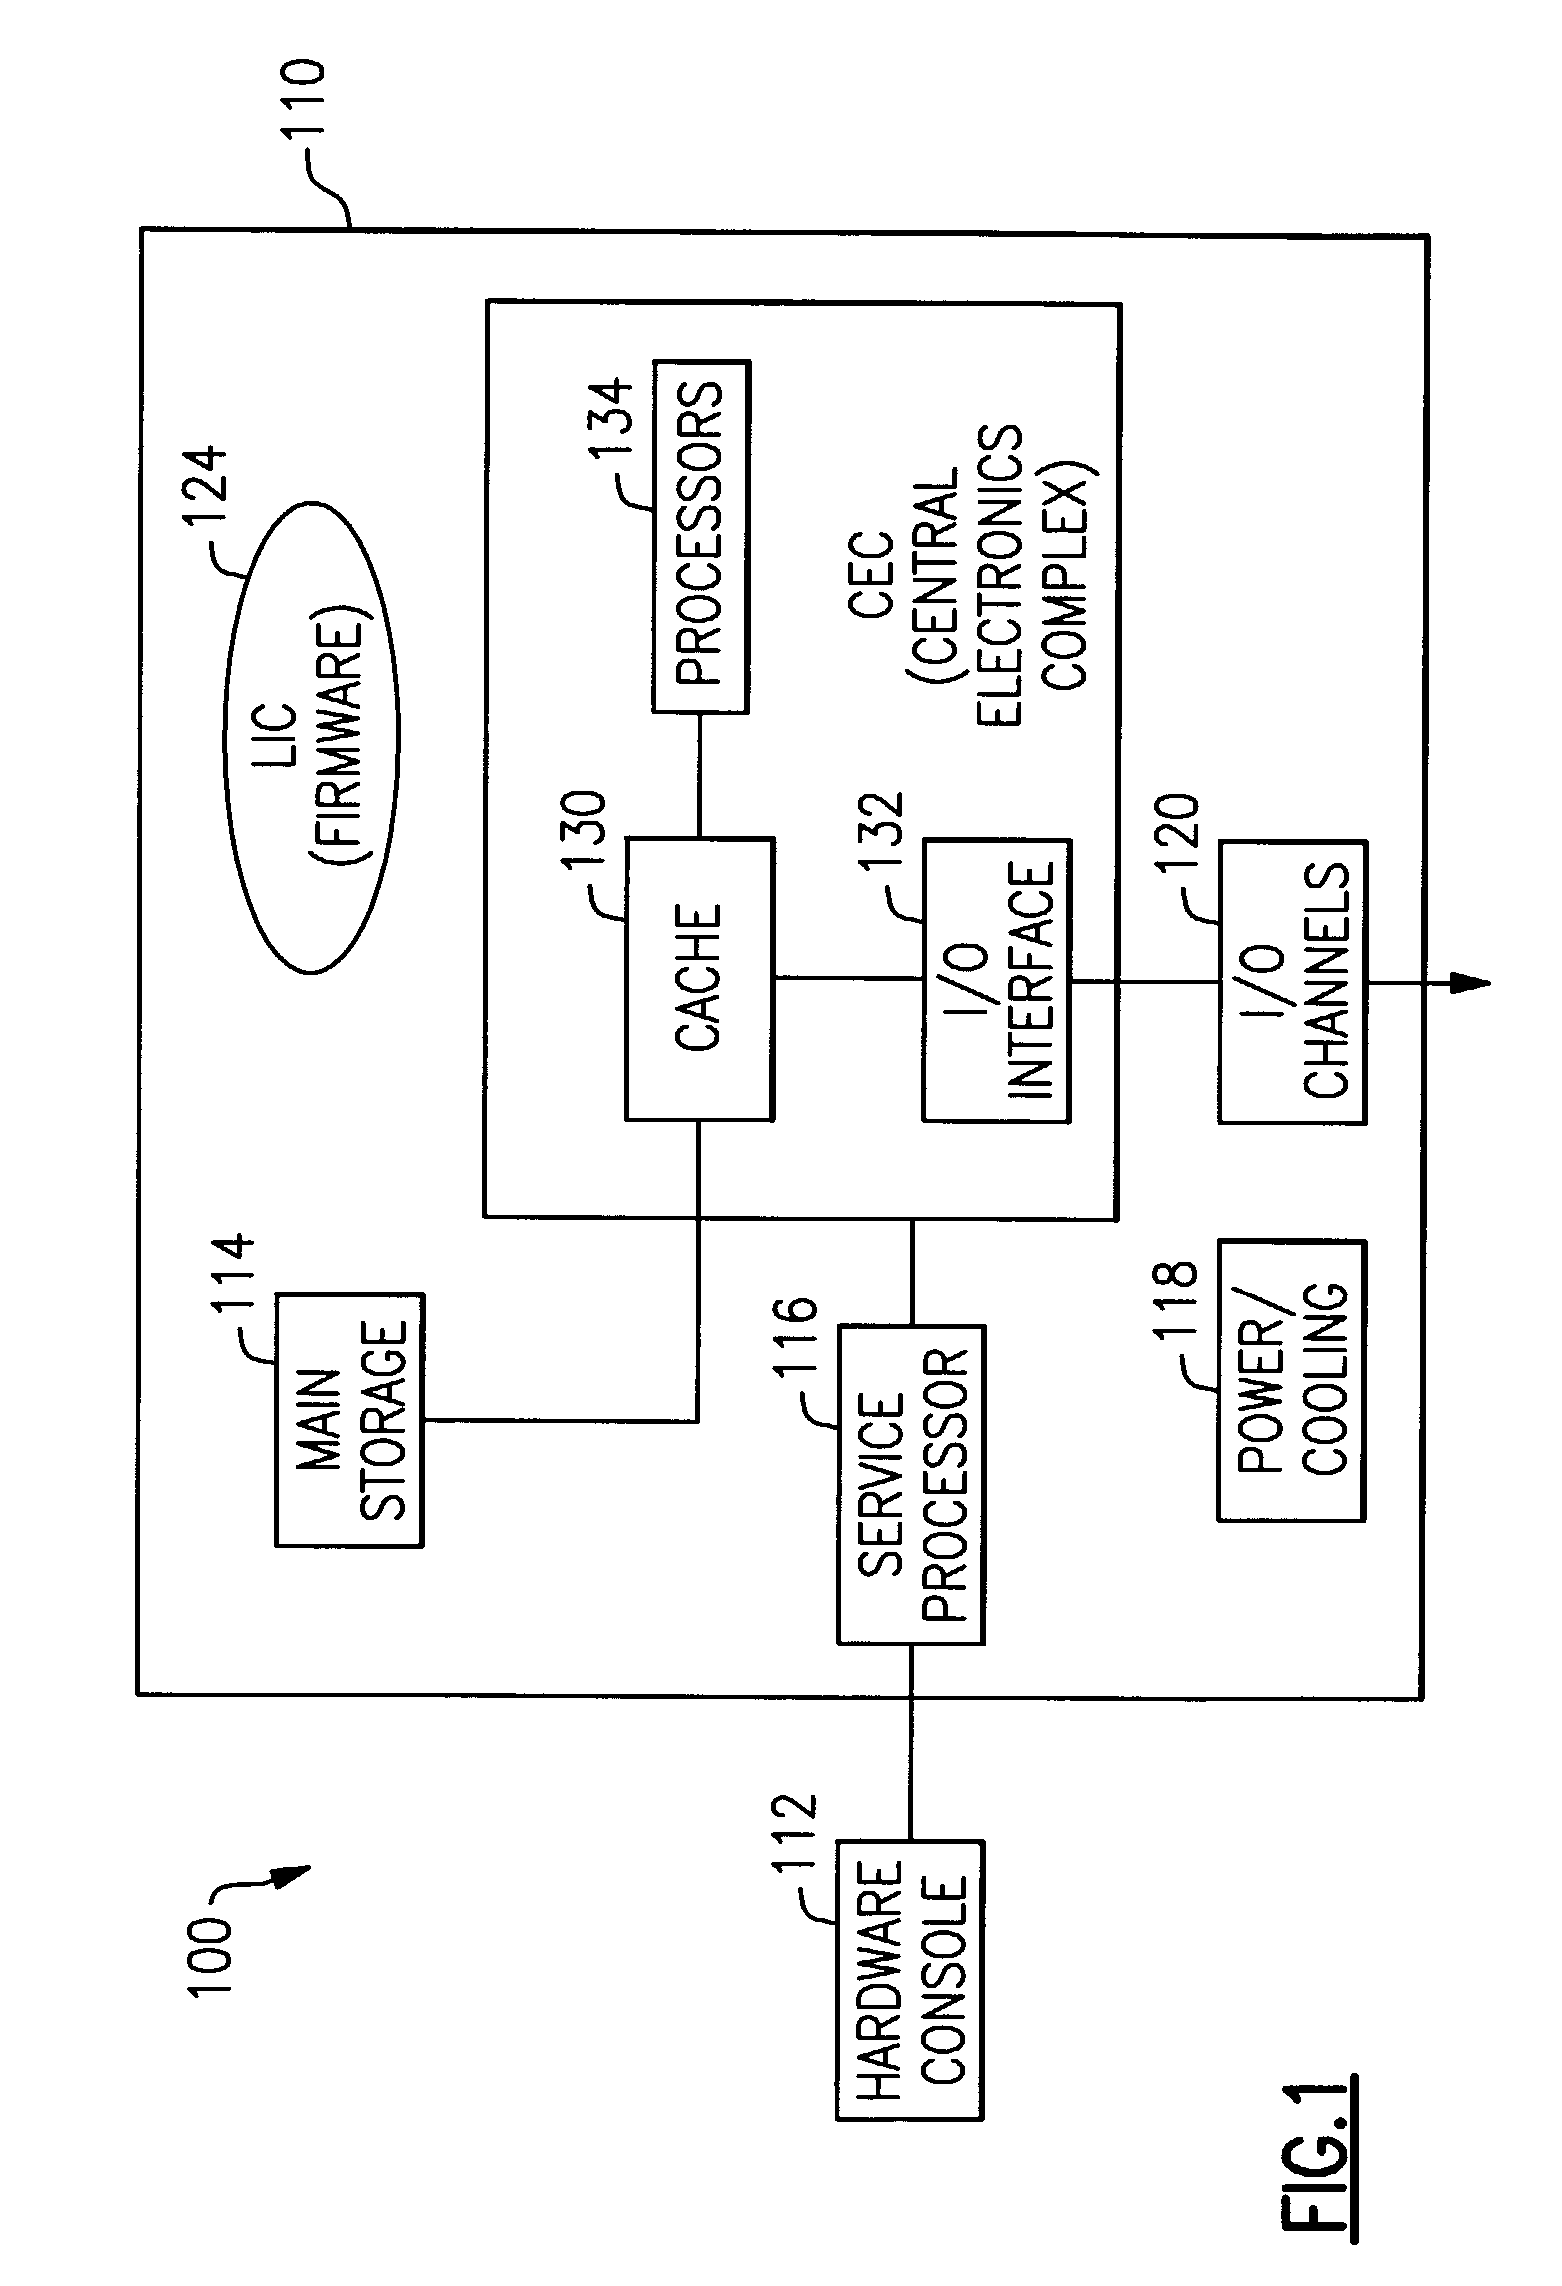 Flexible temporary capacity upgrade/downgrade in a computer system without involvement of the operating system